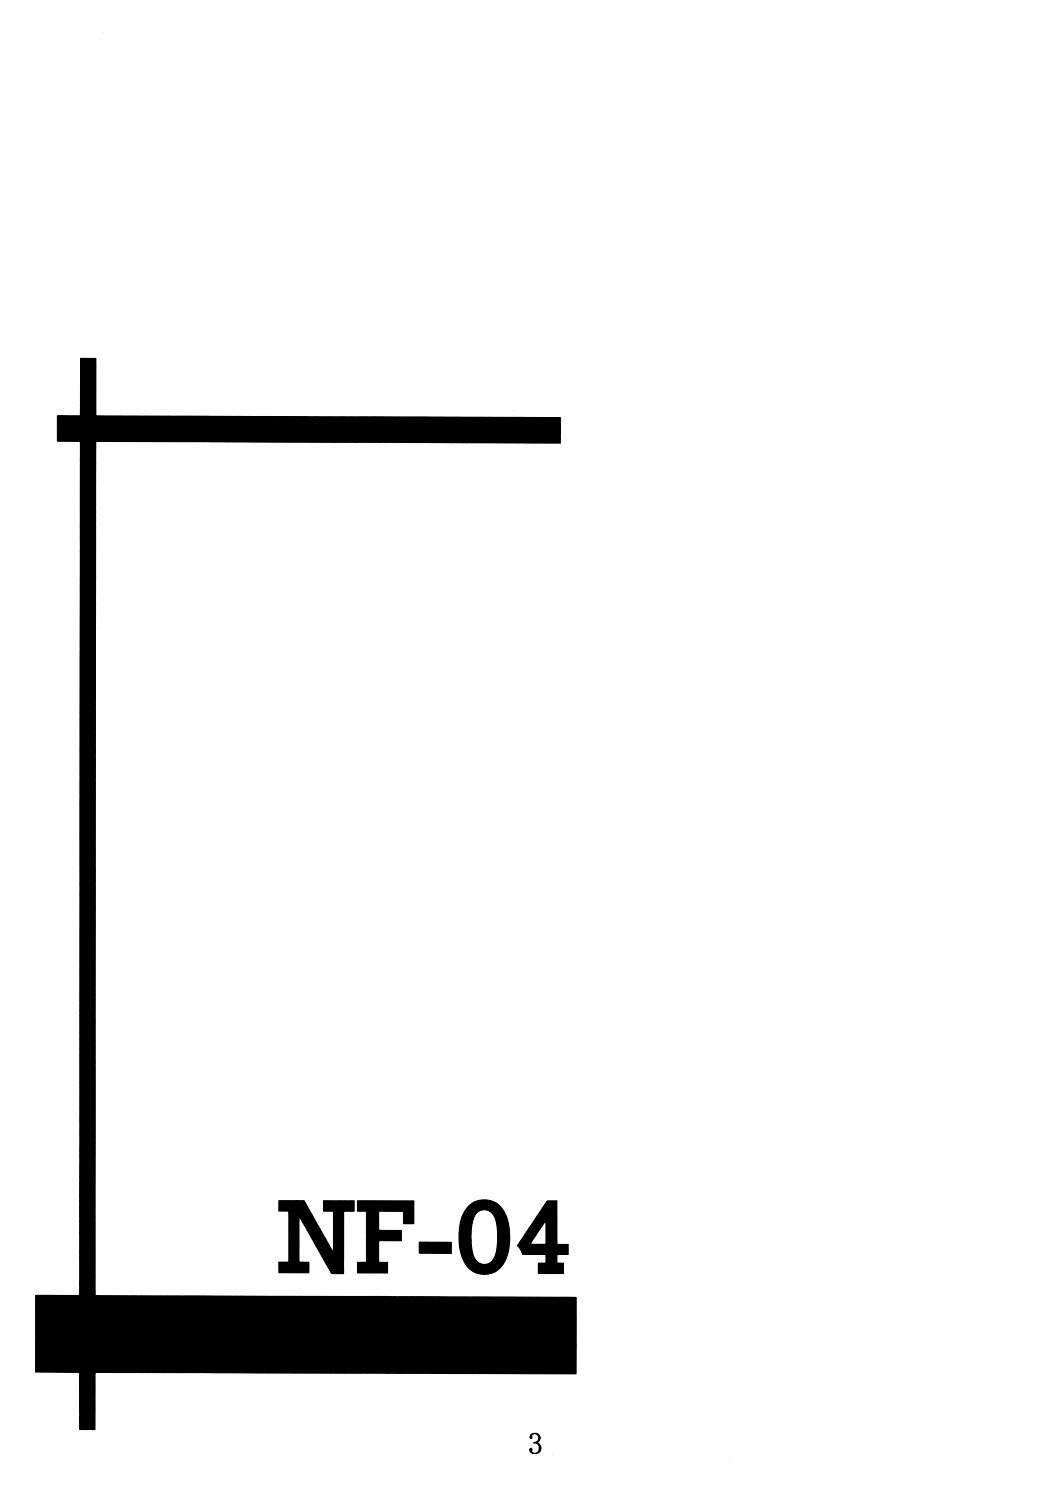 NF-04 1